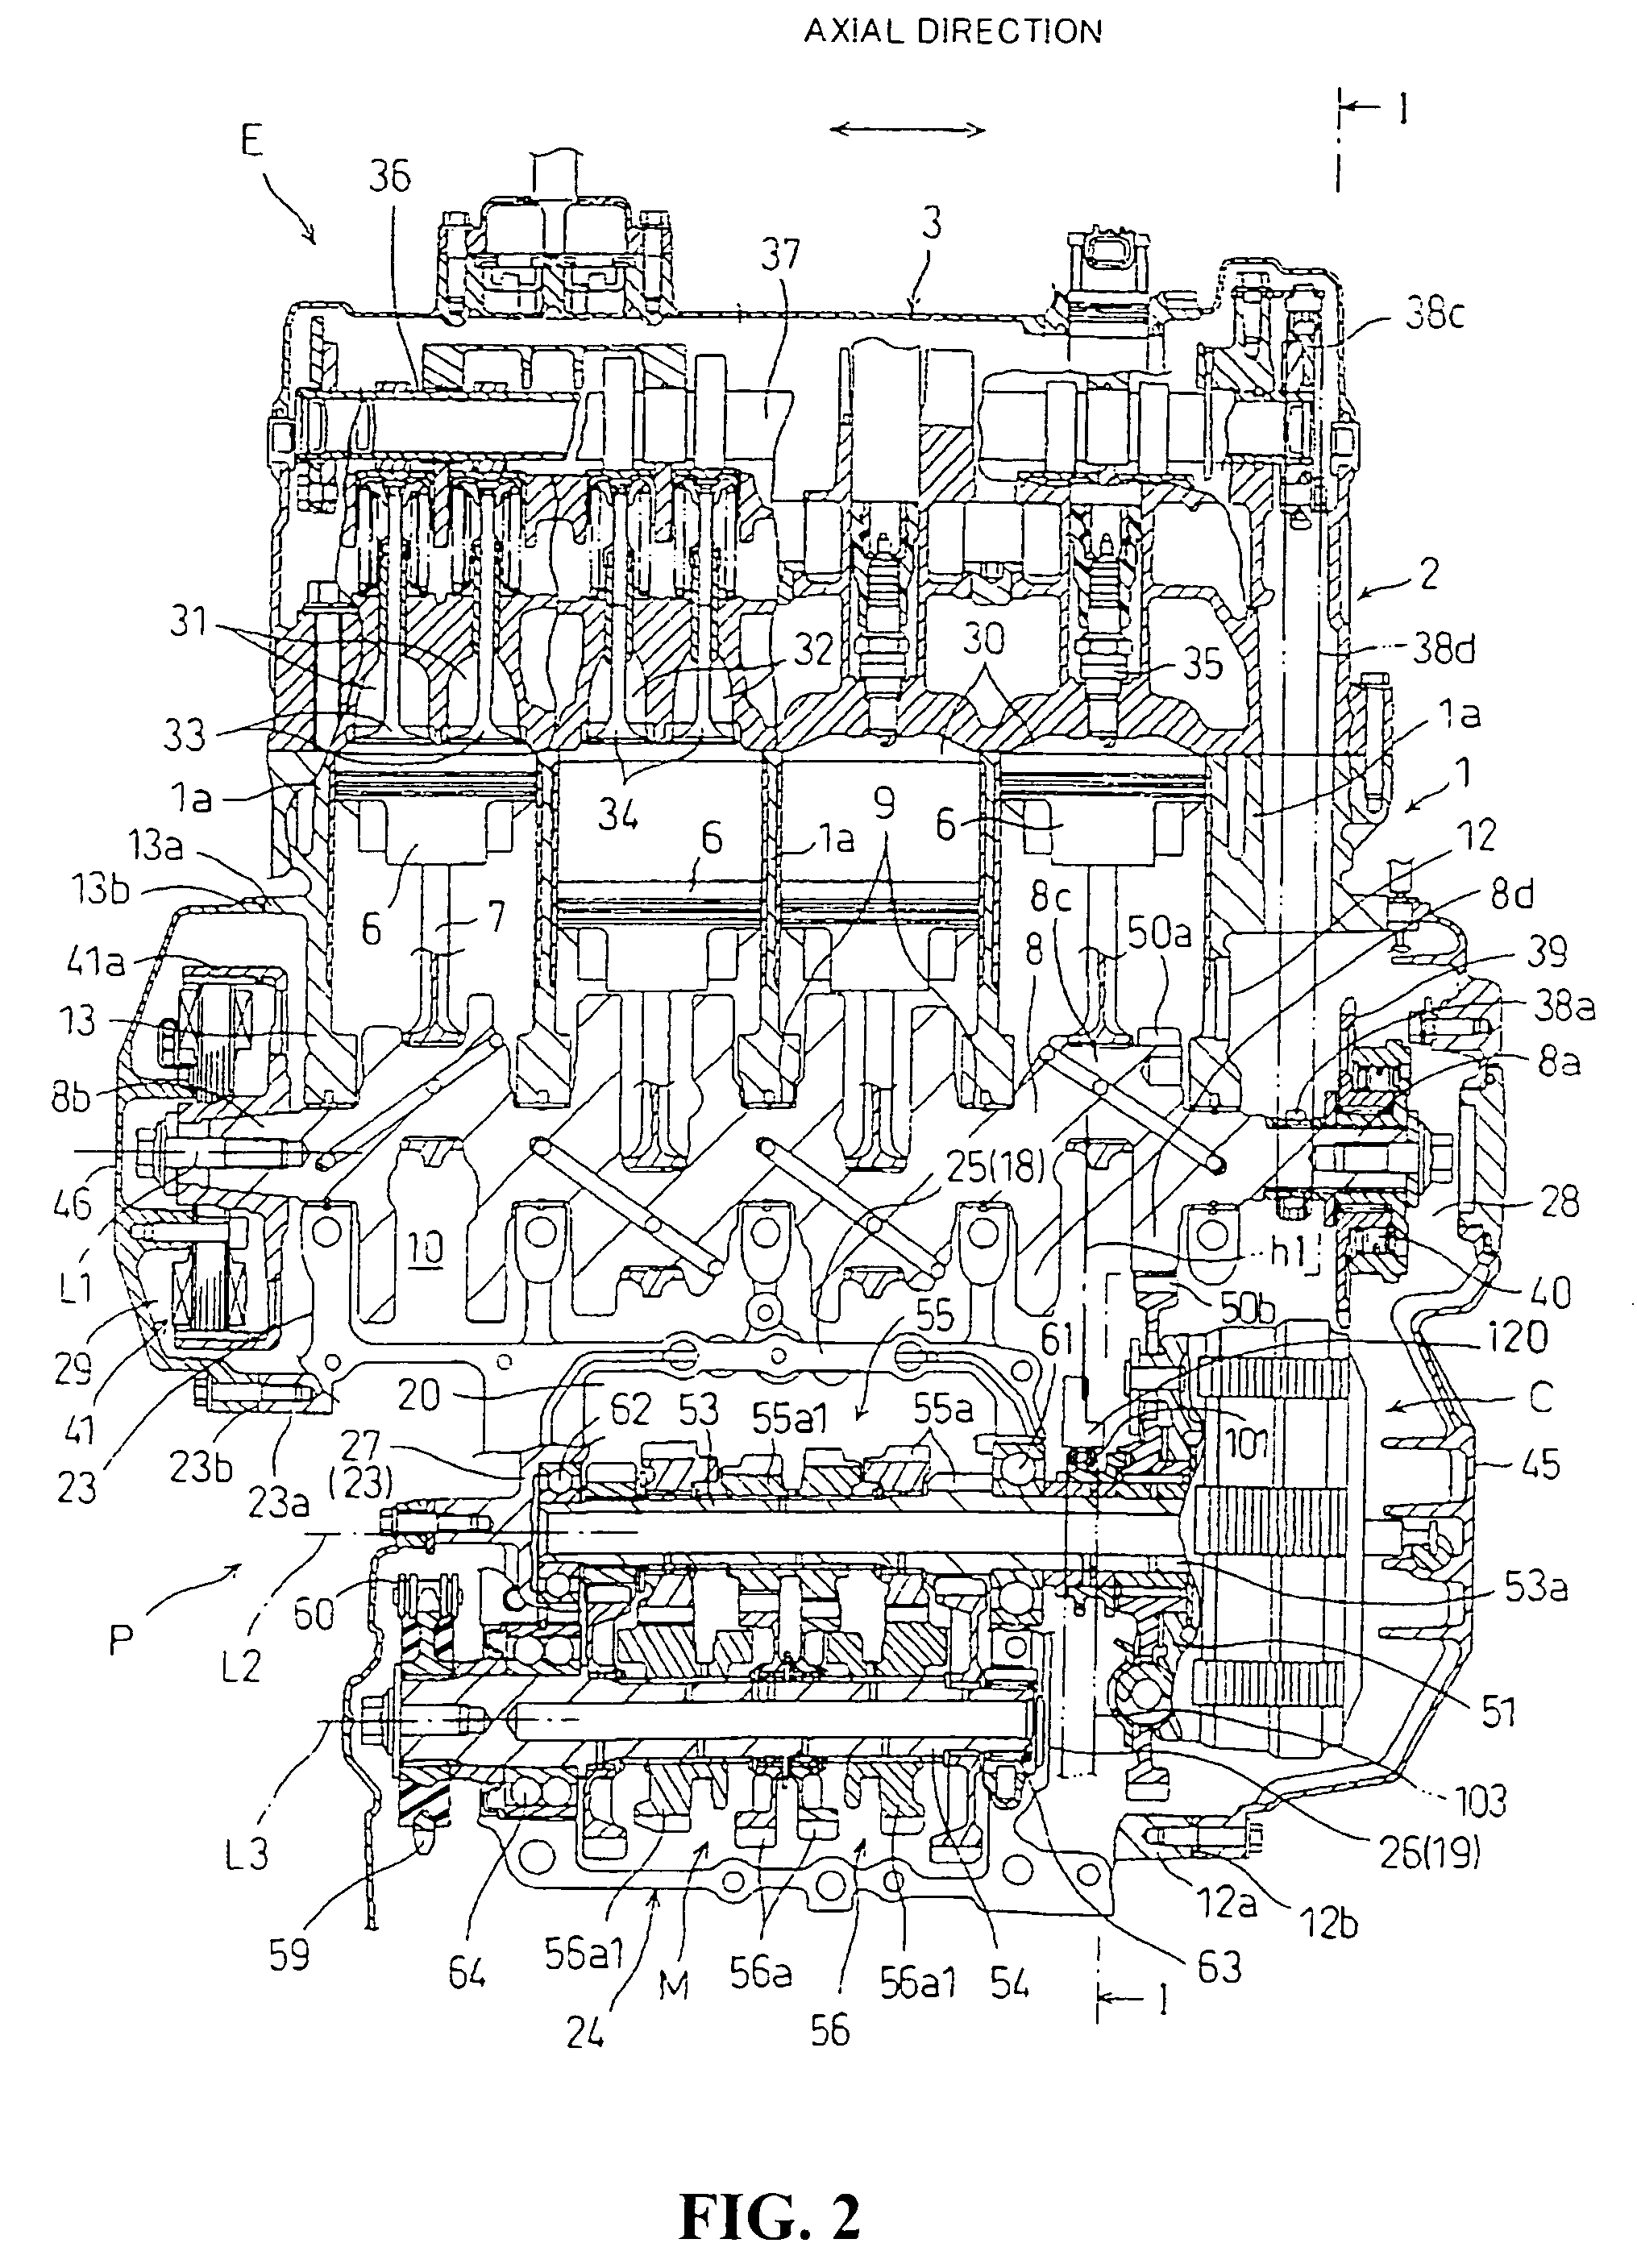 Power unit with auxiliary machine driving transmission mechanism